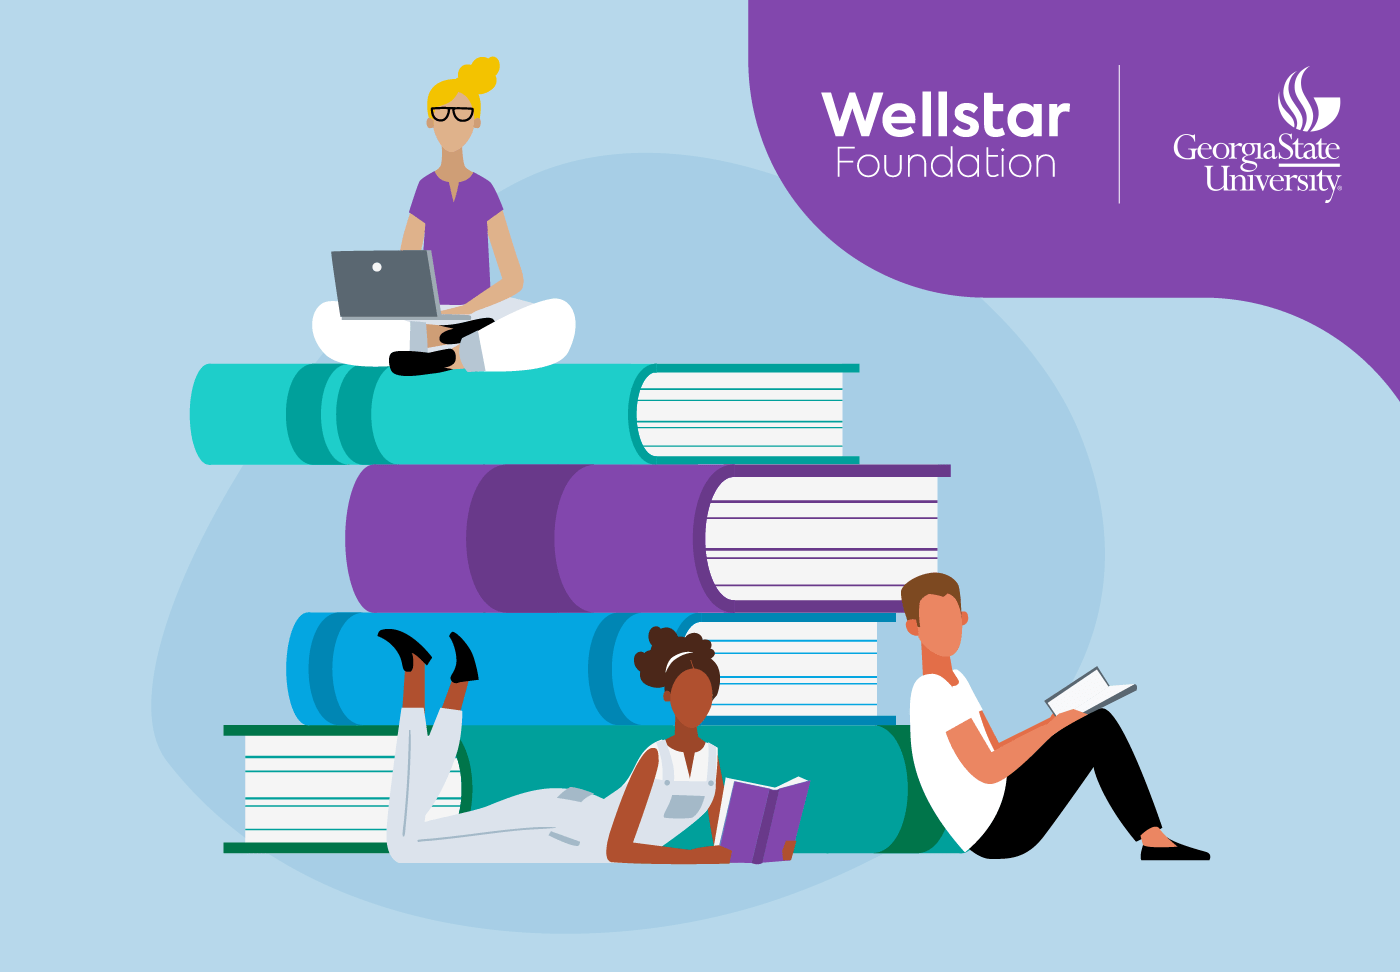 Illustration of stack of books and people studying. Wellstar Foundation and Georgia State University logos.